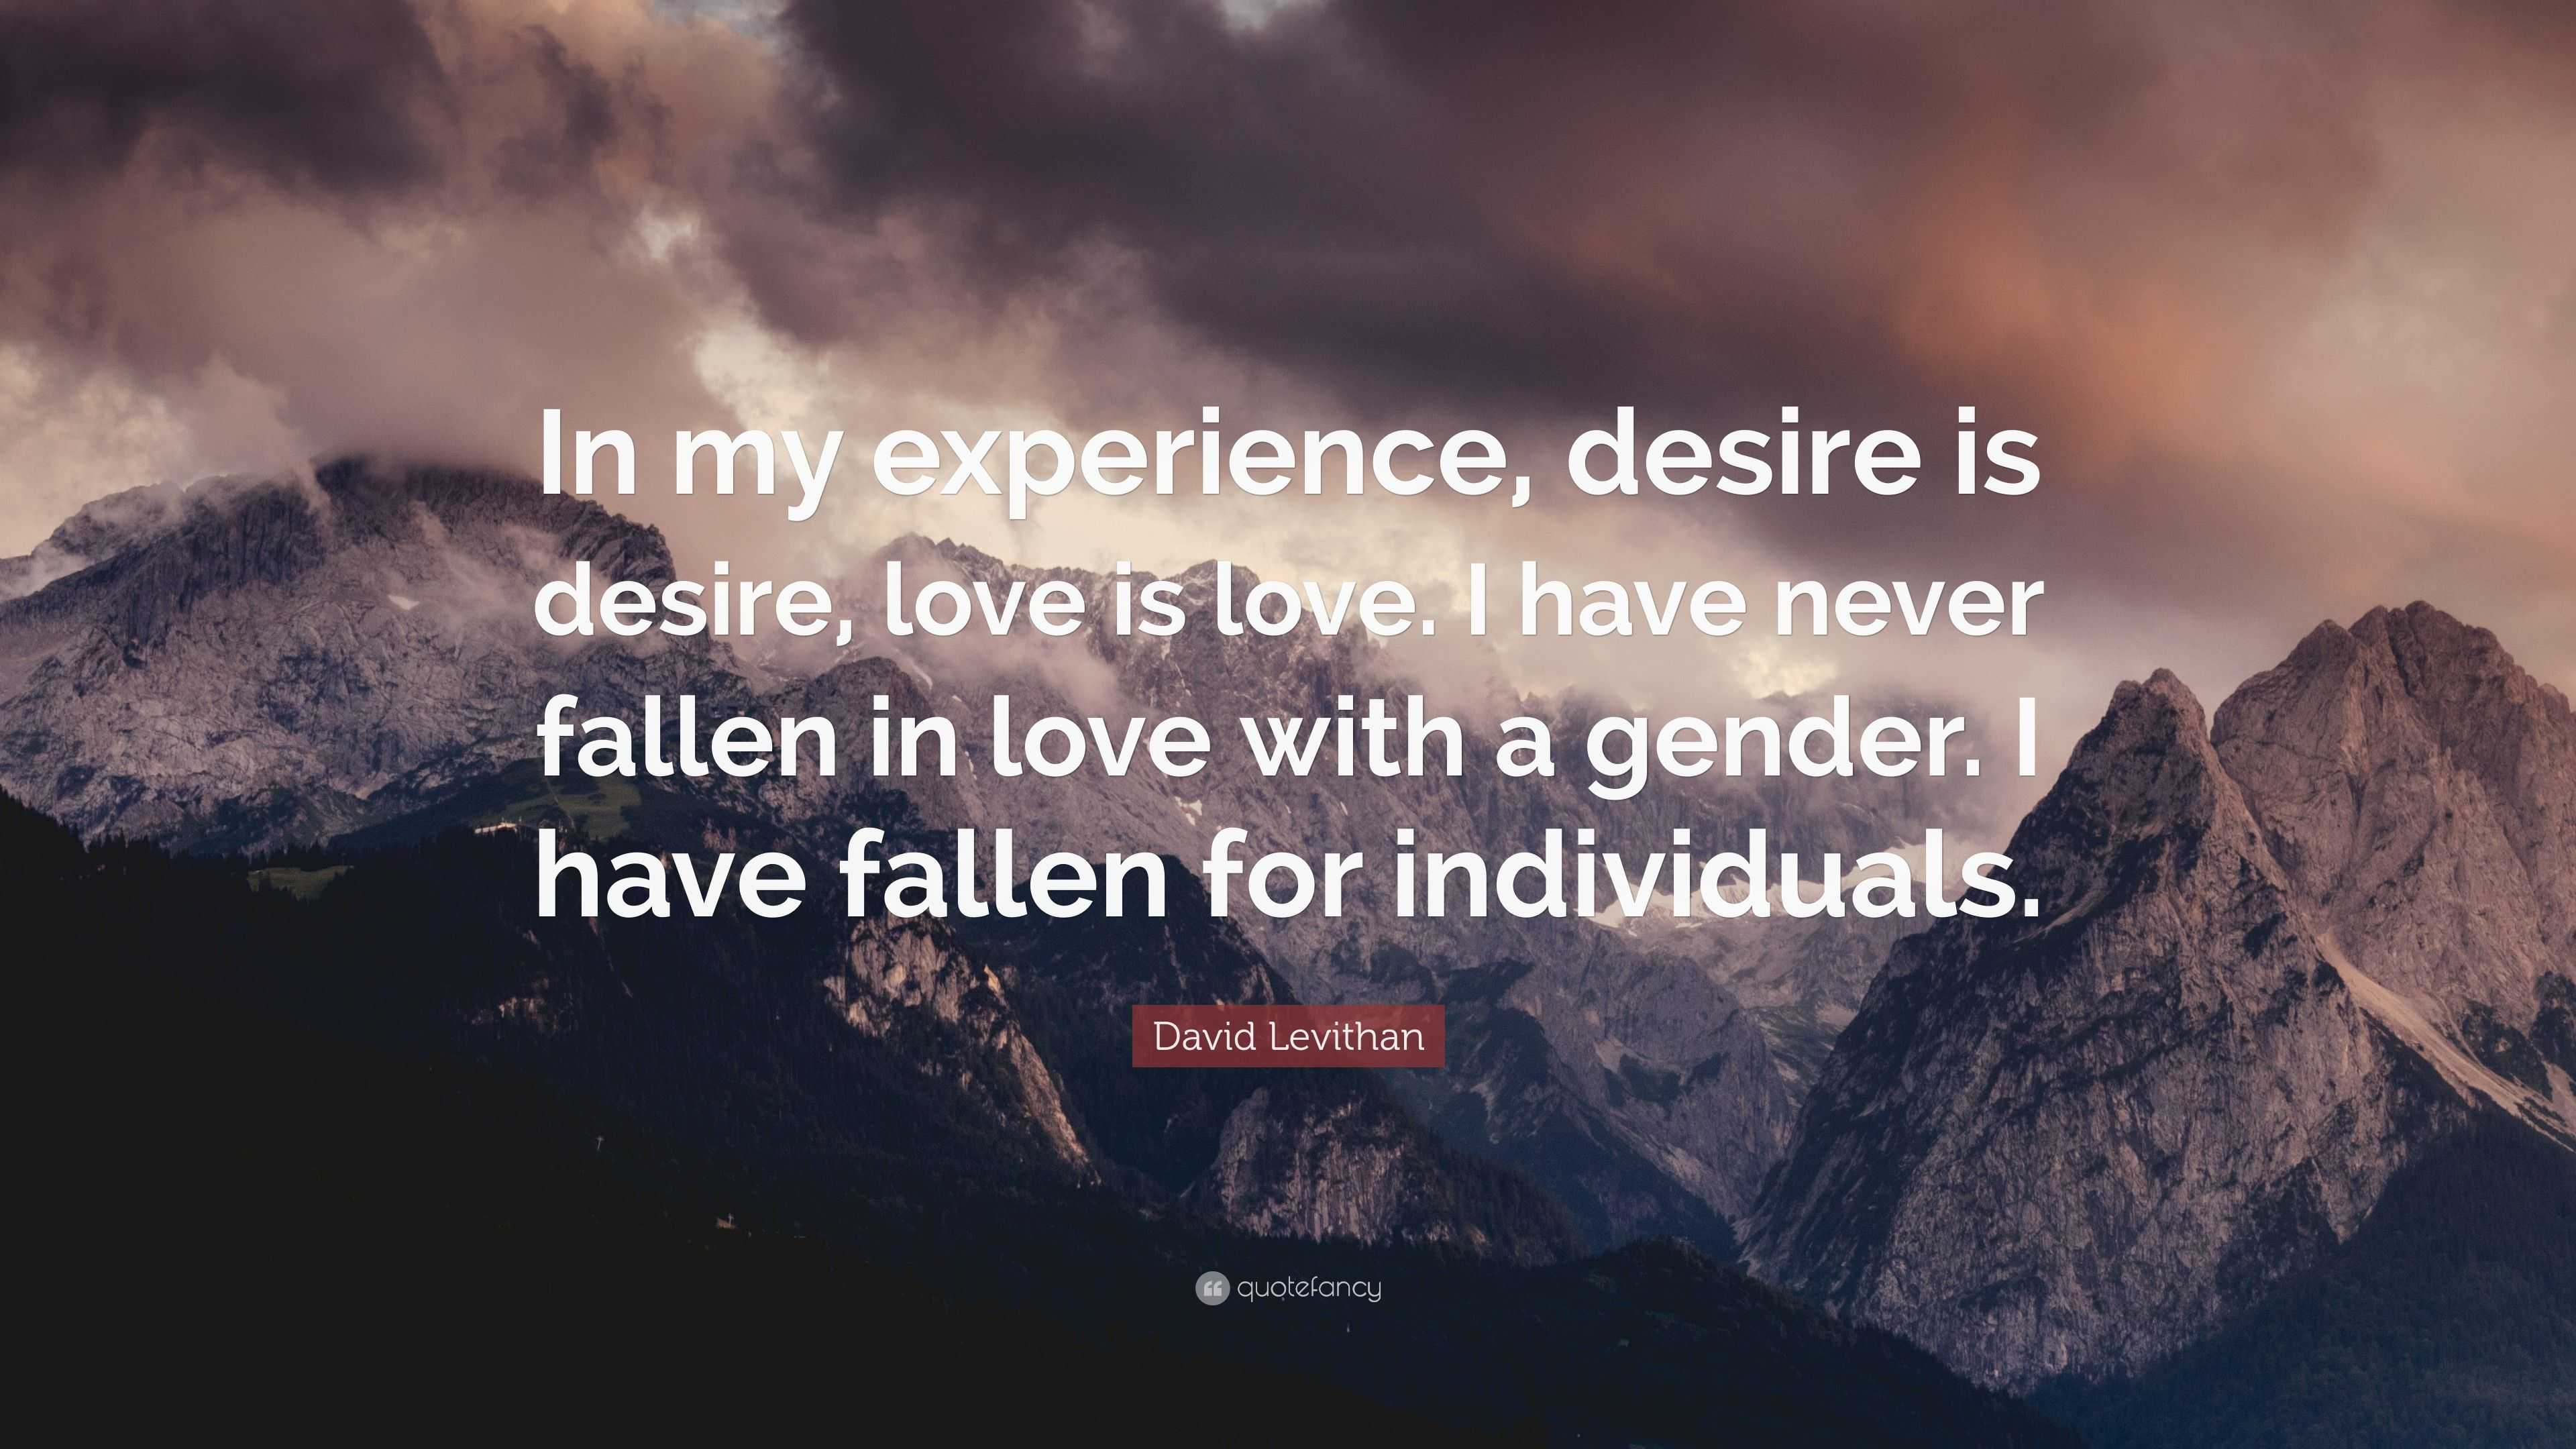 David Levithan Quote: “In my experience, desire is desire, love is love ...